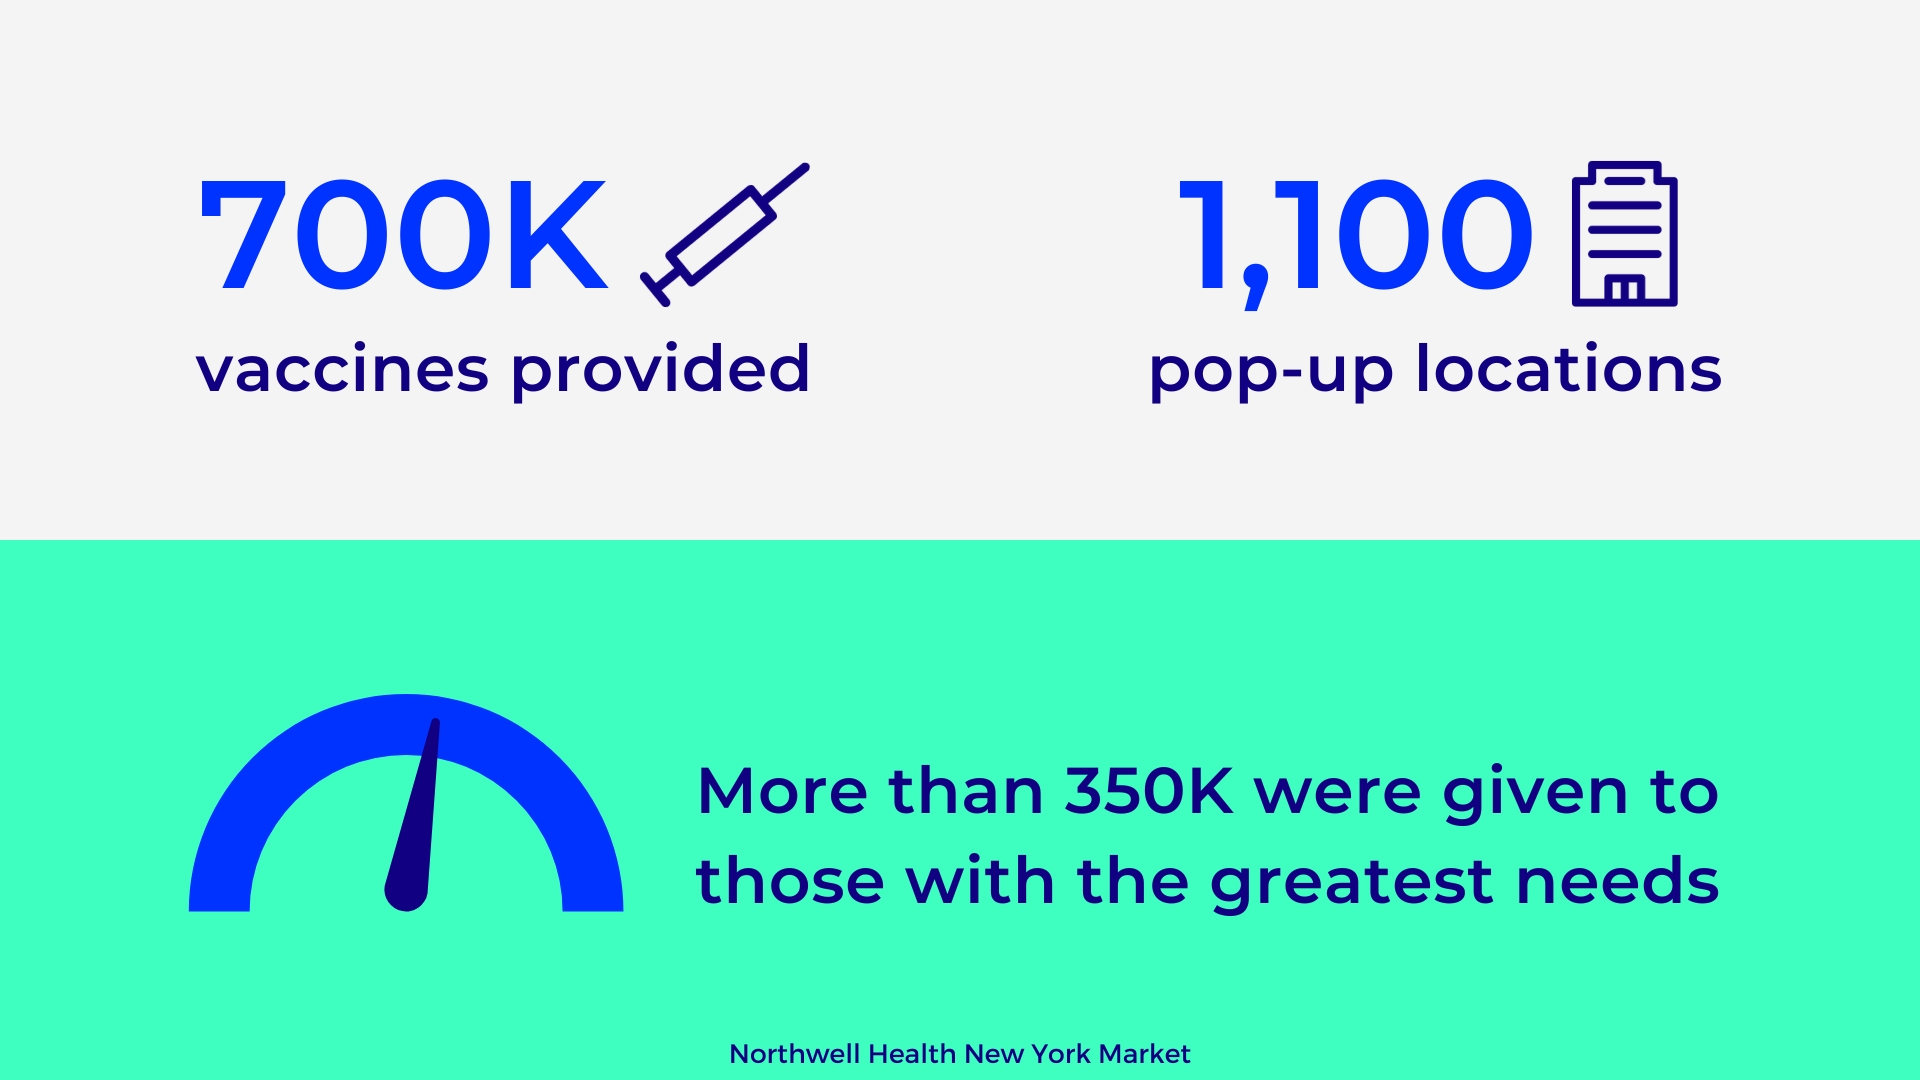 700k vaccines provided at 1,100 pop up locations with more than half of those given to those with the greatest needs